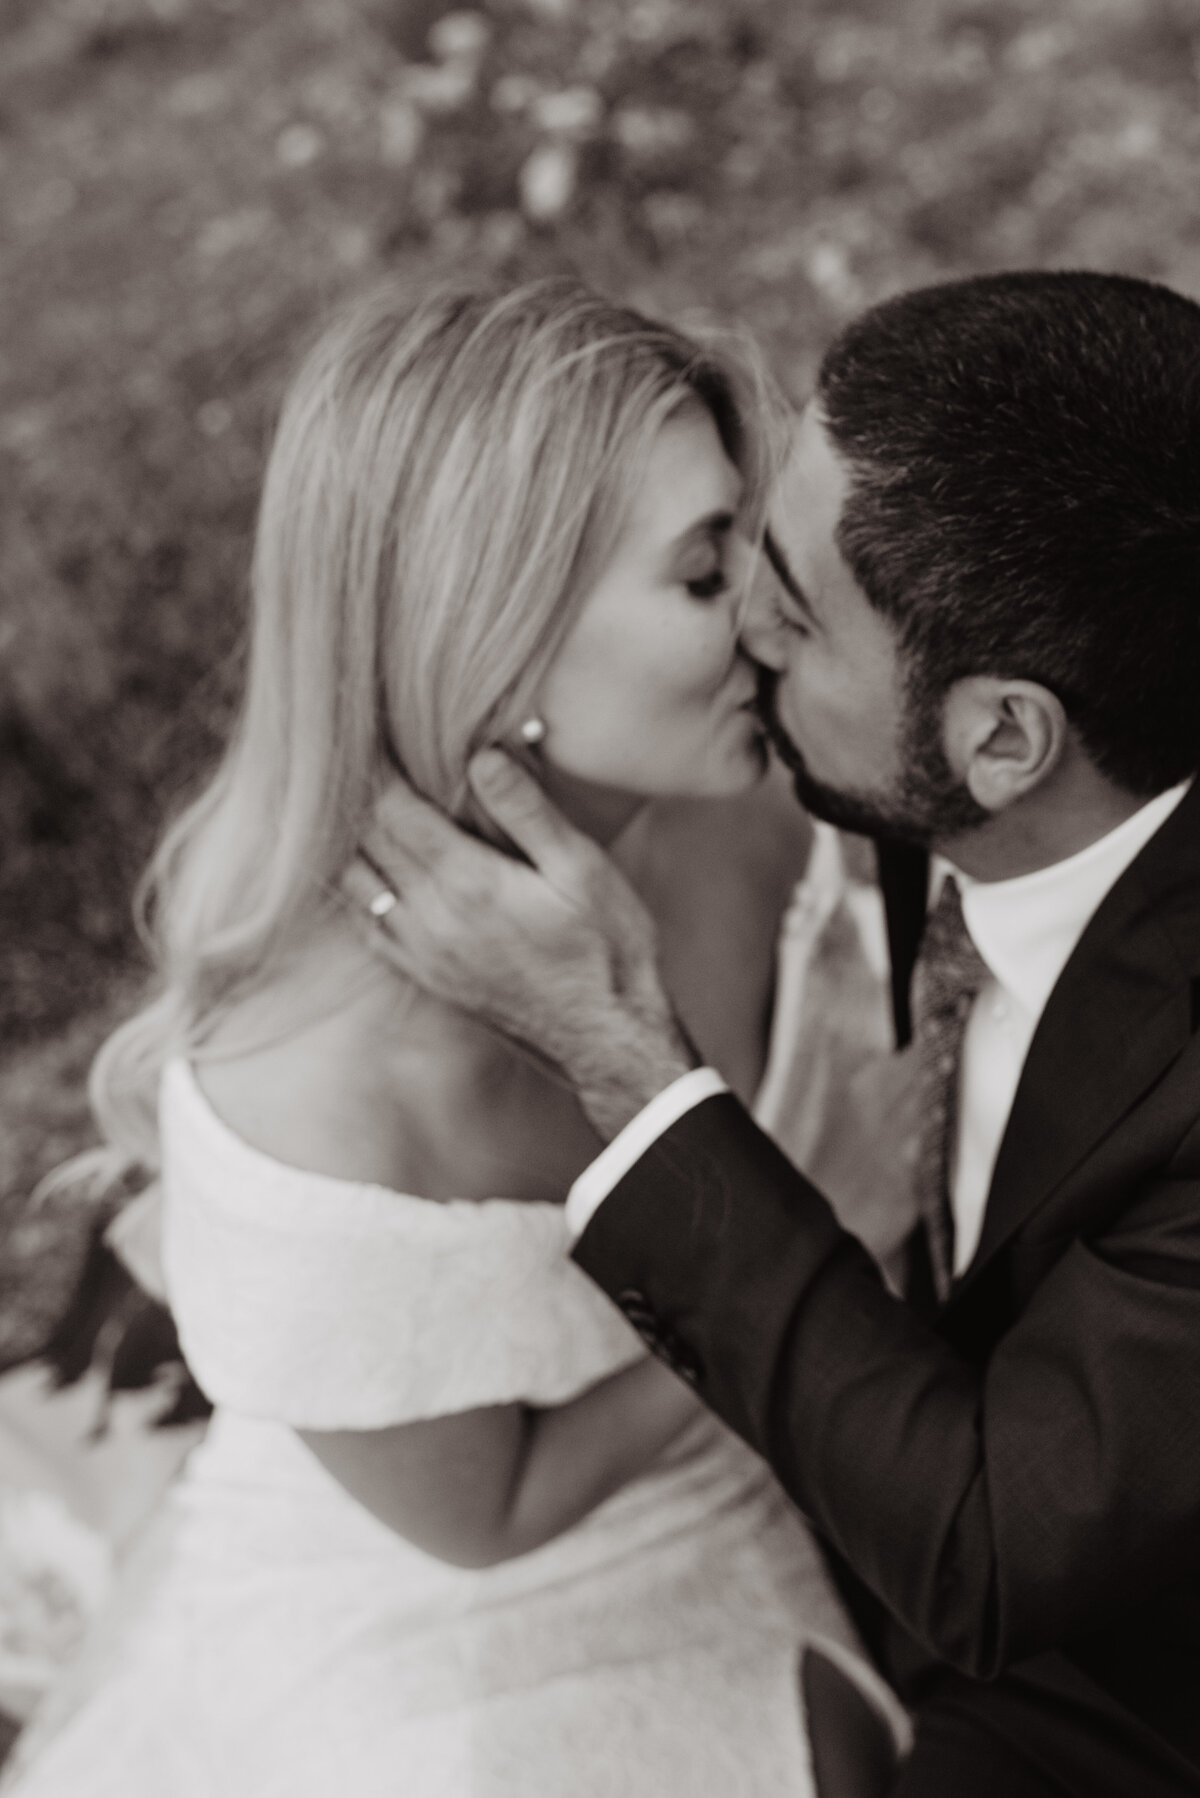 Photographers Jackson Hole capture groom kissing bride in black and white portraits